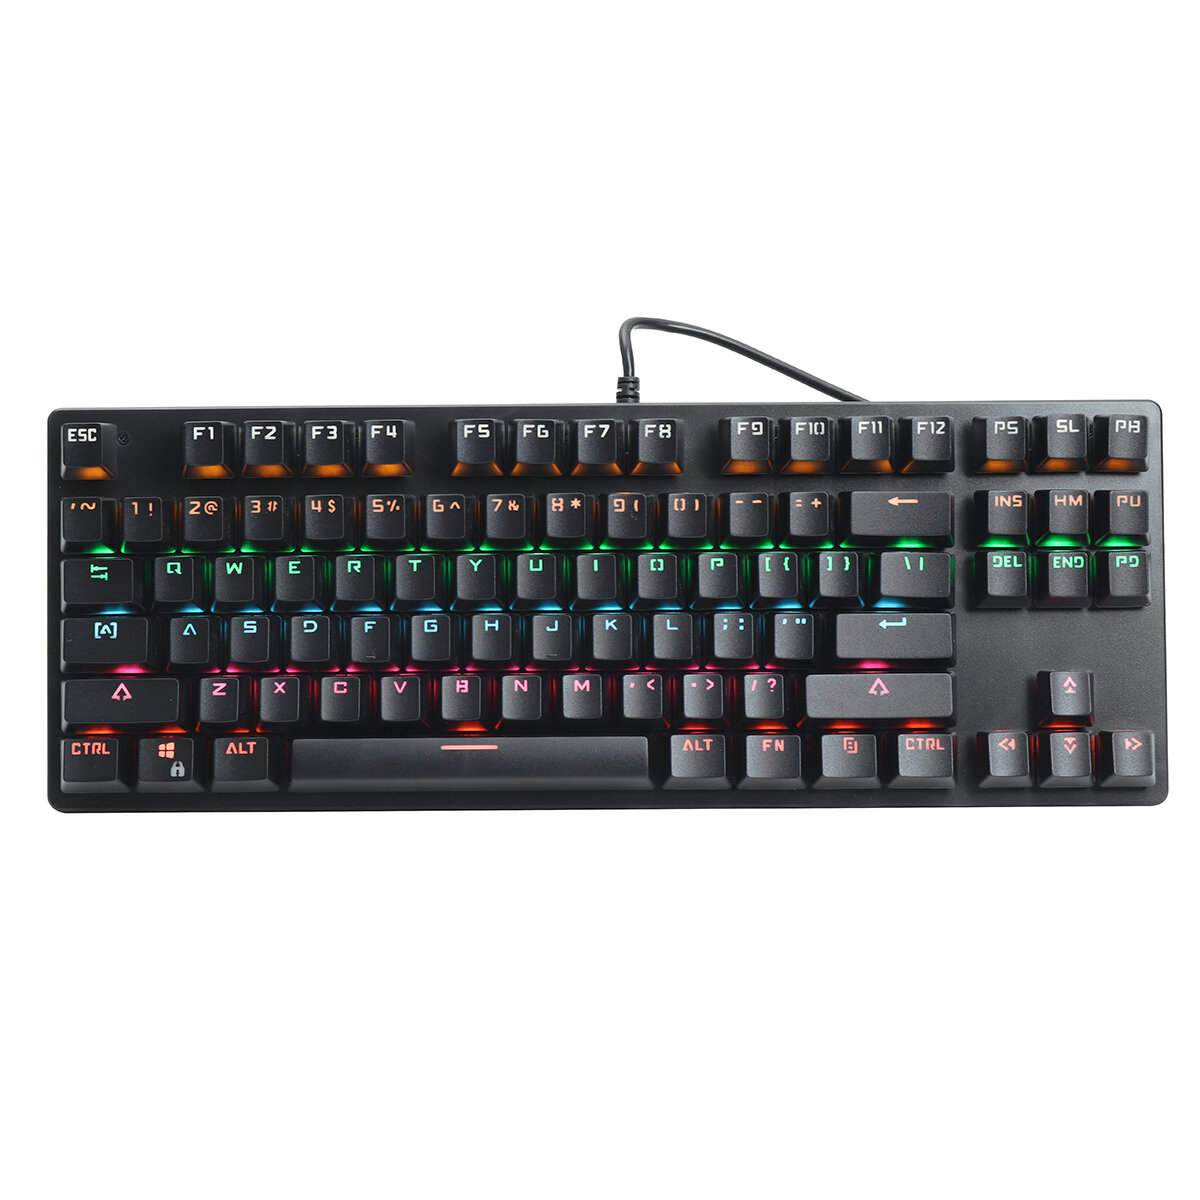 ICEDI K870 Wired Mechanical Keyboard 87 Keys Hot Swappable Blue Switch Suspended Keycaps RGB Backlit Gaming Keyboard with Supplement Blue Switches Keycap Puller